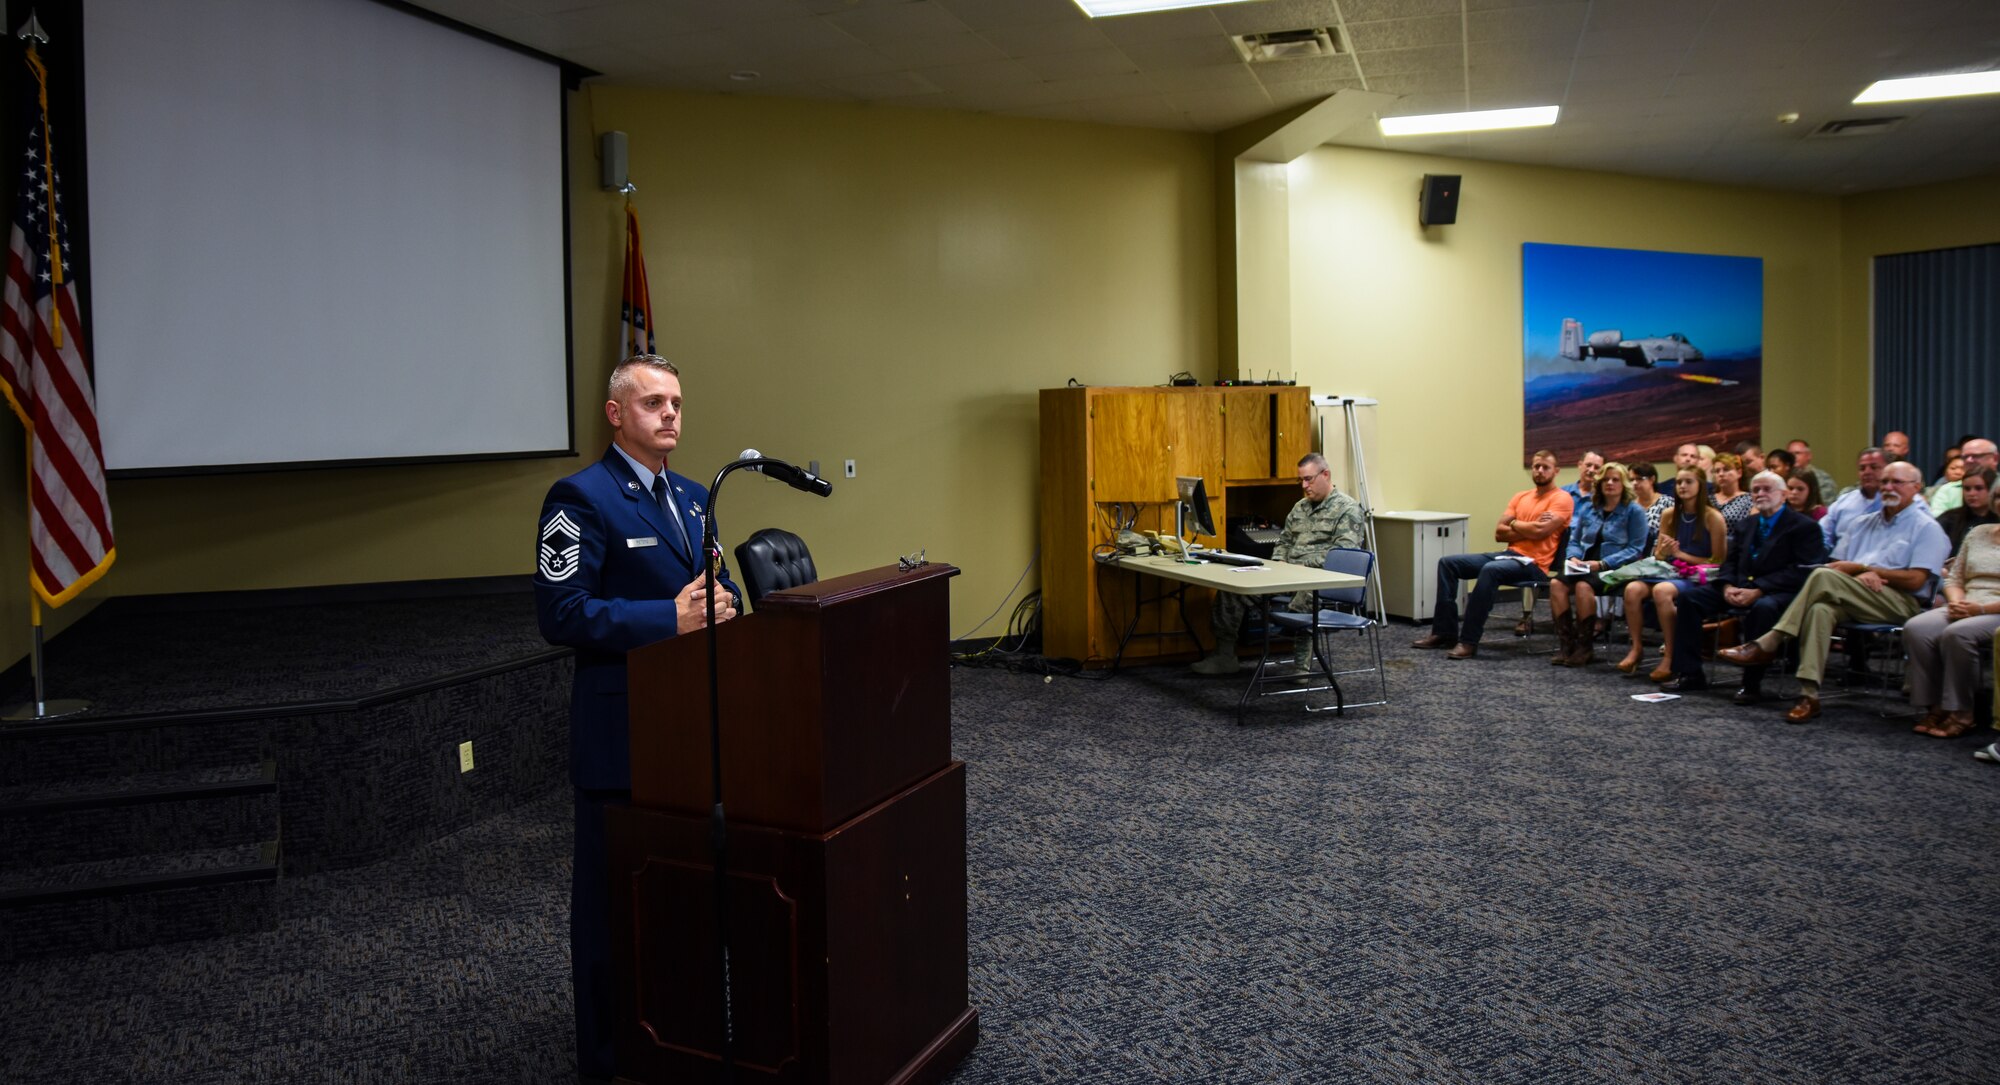 Chief Master Sgt. Bryan Peters, 188th Force Support Squadron supervisor, stresses the importance of leaders to make tough decisions during his retirement ceremony Aug. 7, 2016, at Ebbing Air National Guard Base, Fort Smith, Ark. Peters has served in the Air National Guard for over 24 years, all with the 188th Wing. (U.S. Air National Guard photo by Senior Airman Cody Martin)